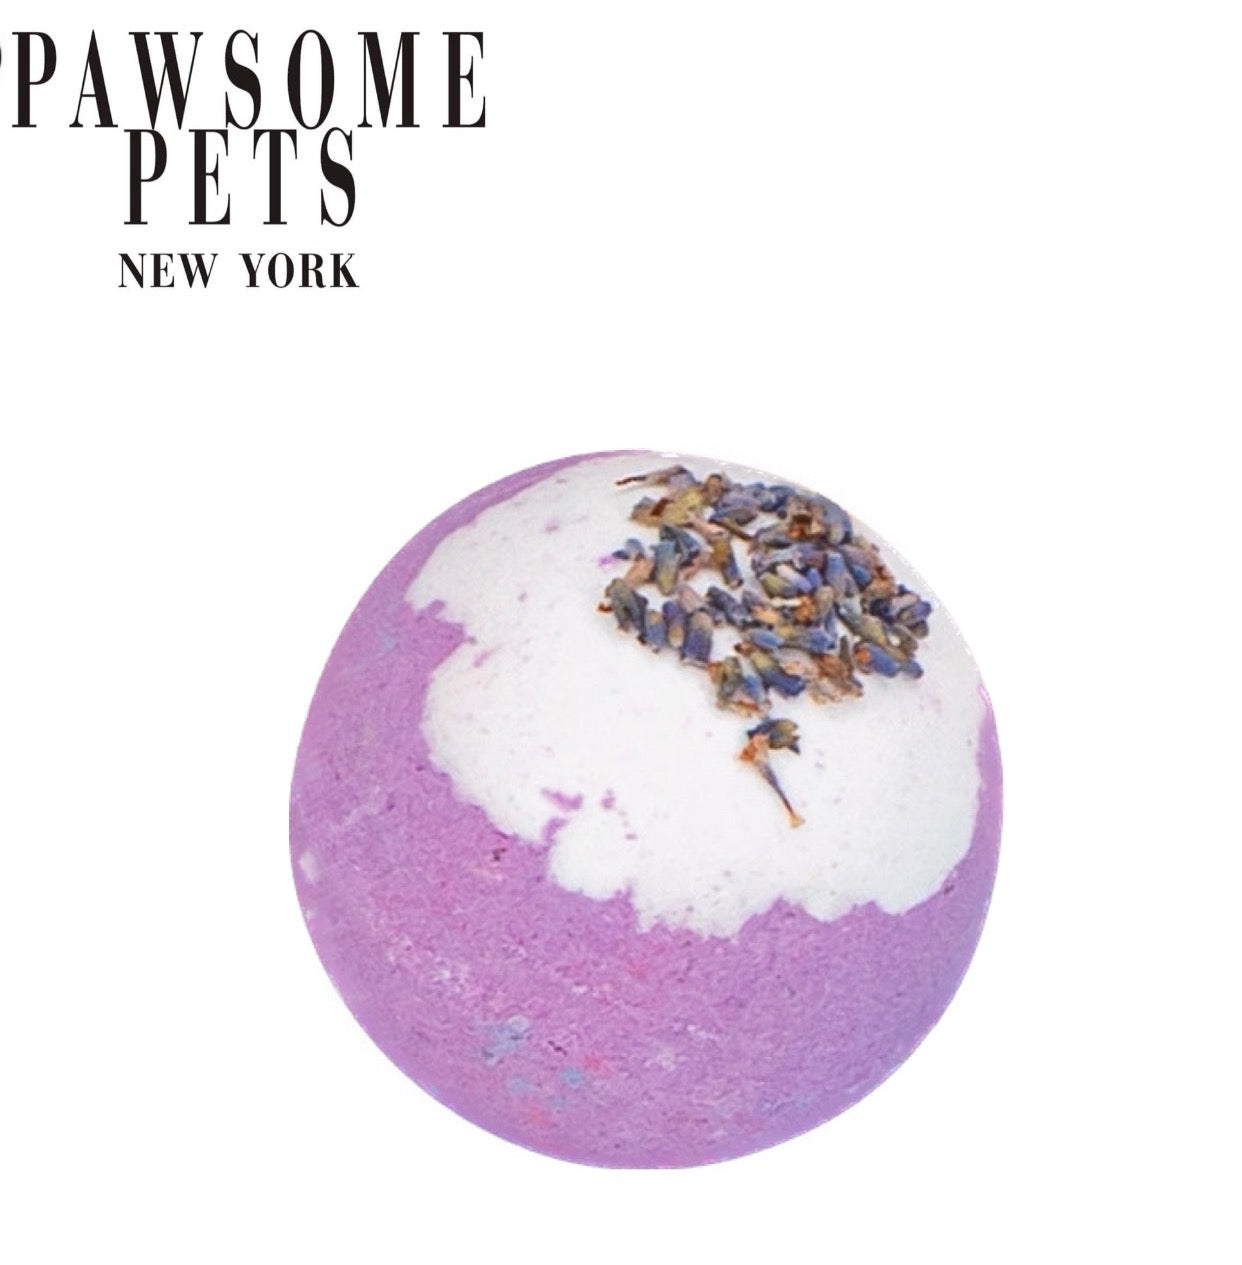 BATH BOMBS FOR DOGS - DRY LAVENDER